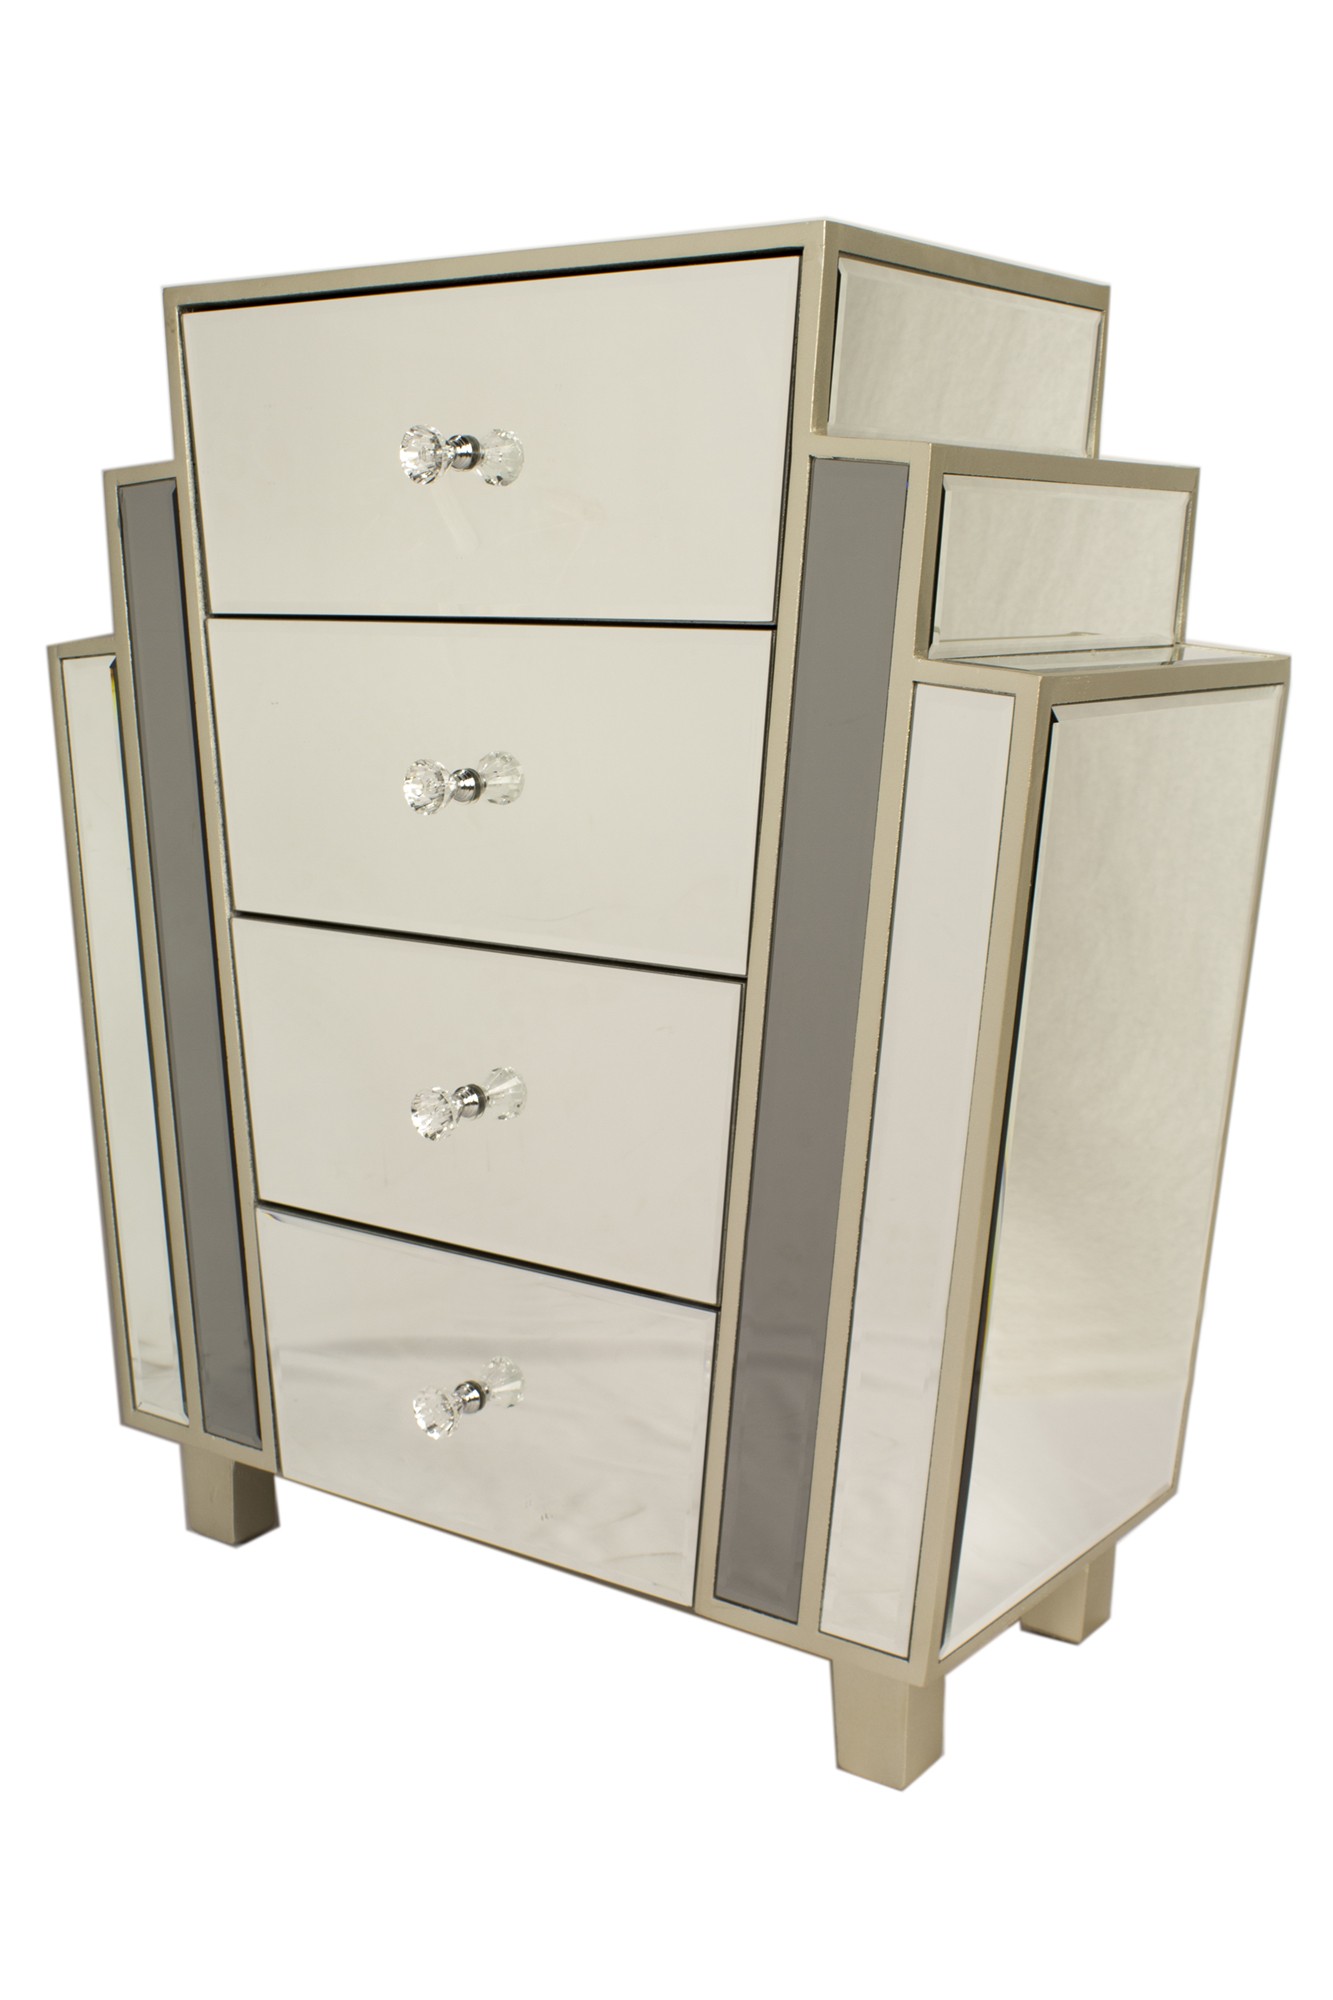 Gray MDF Wood Mirrored Glass Accent Cabinet with Drawers